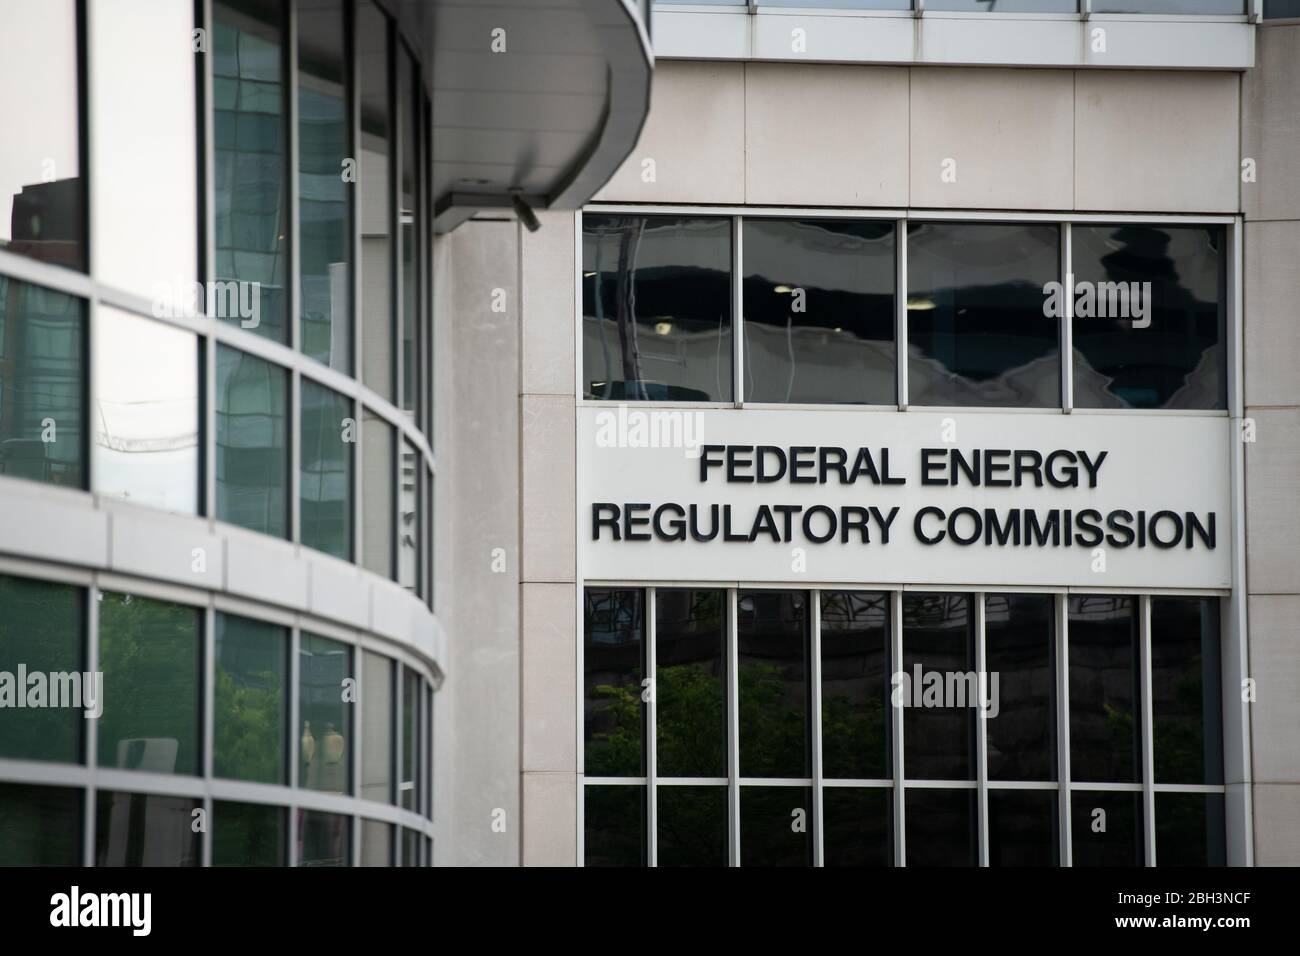 Washington, USA. 23rd Apr, 2020. A general view of the Federal Energy Regulatory Commission (FERC) in Washington, DC on April 23, 2020 amid the Coronavirus pandemic. After extended negotiations over an additional $500 billion in stimulus funding in response to the ongoing COVID-19 outbreak, the U.S. Congress is set send another economic relief bill to President Trump to sign into law after a House vote later today. (Graeme Sloan/Sipa USA) Credit: Sipa USA/Alamy Live News Stock Photo